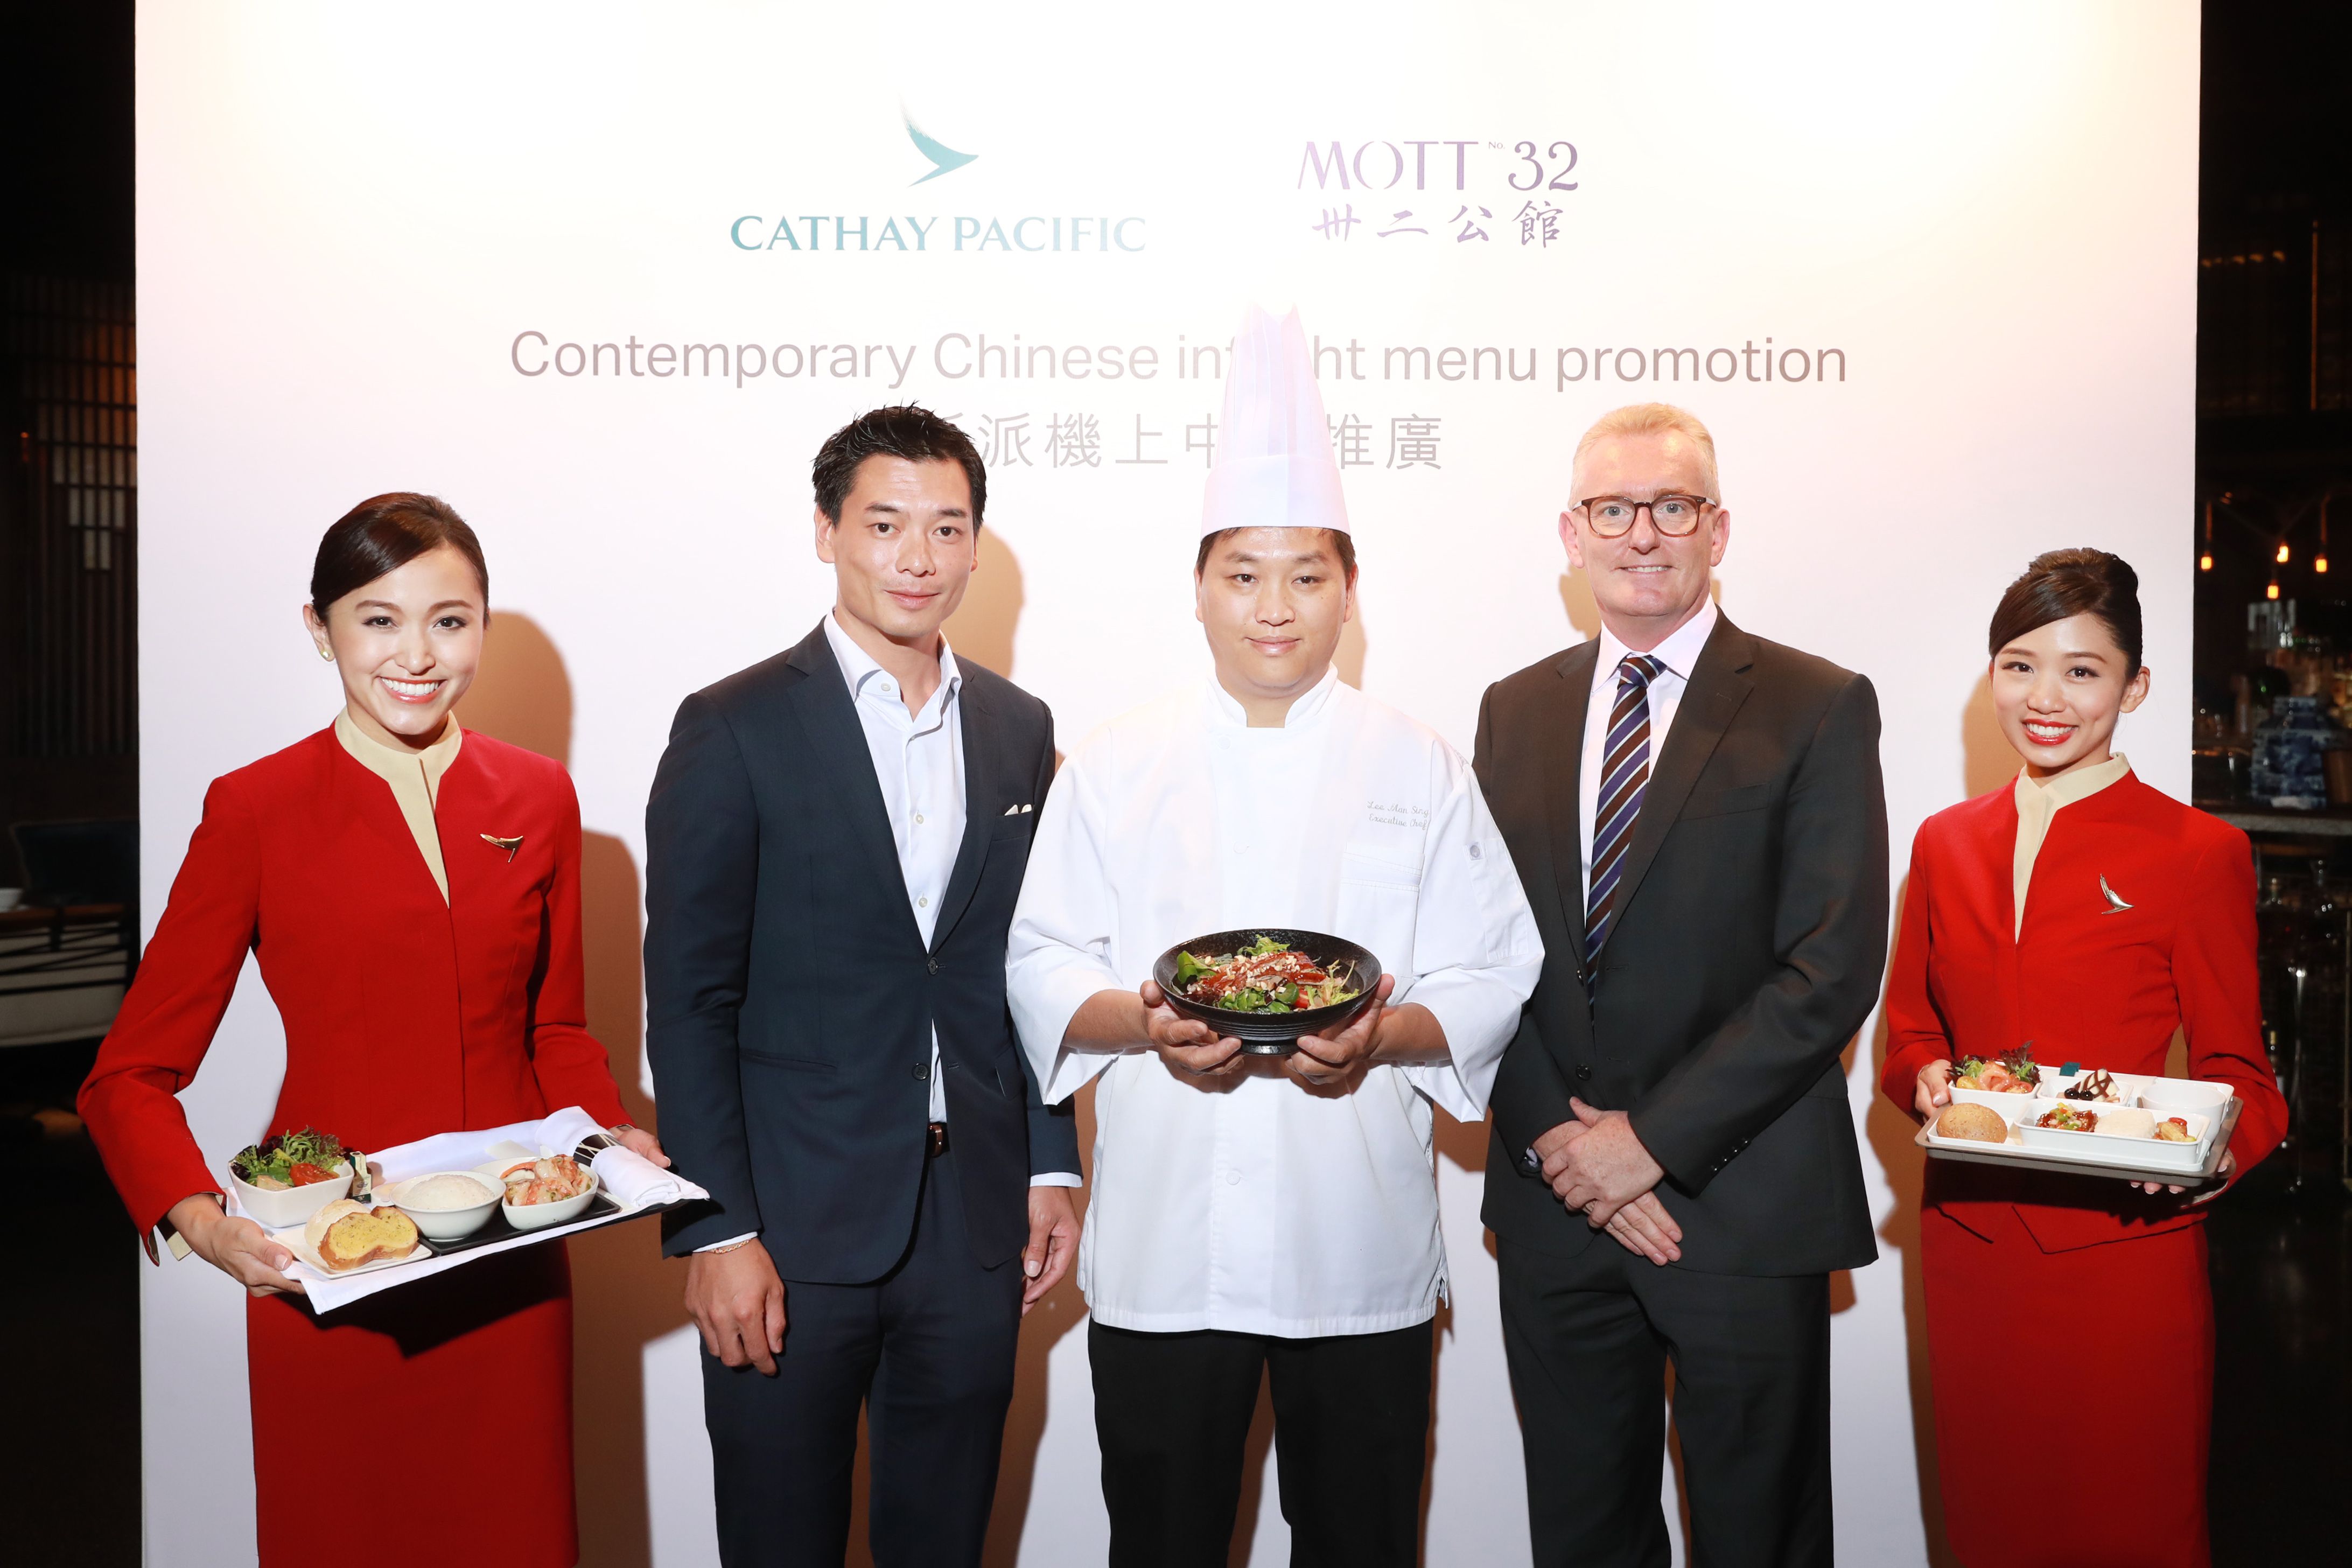 Cathay Pacific Head of Catering Aaron Claxton (second from right), Founder and Managing Director of Maximal Concepts Xuan Mu (second from left) and Chinese Group Executive Chef Lee Man-sing (middle) pose with the new Mott 32 dishes showcased by Cathay Pacific cabin crew.